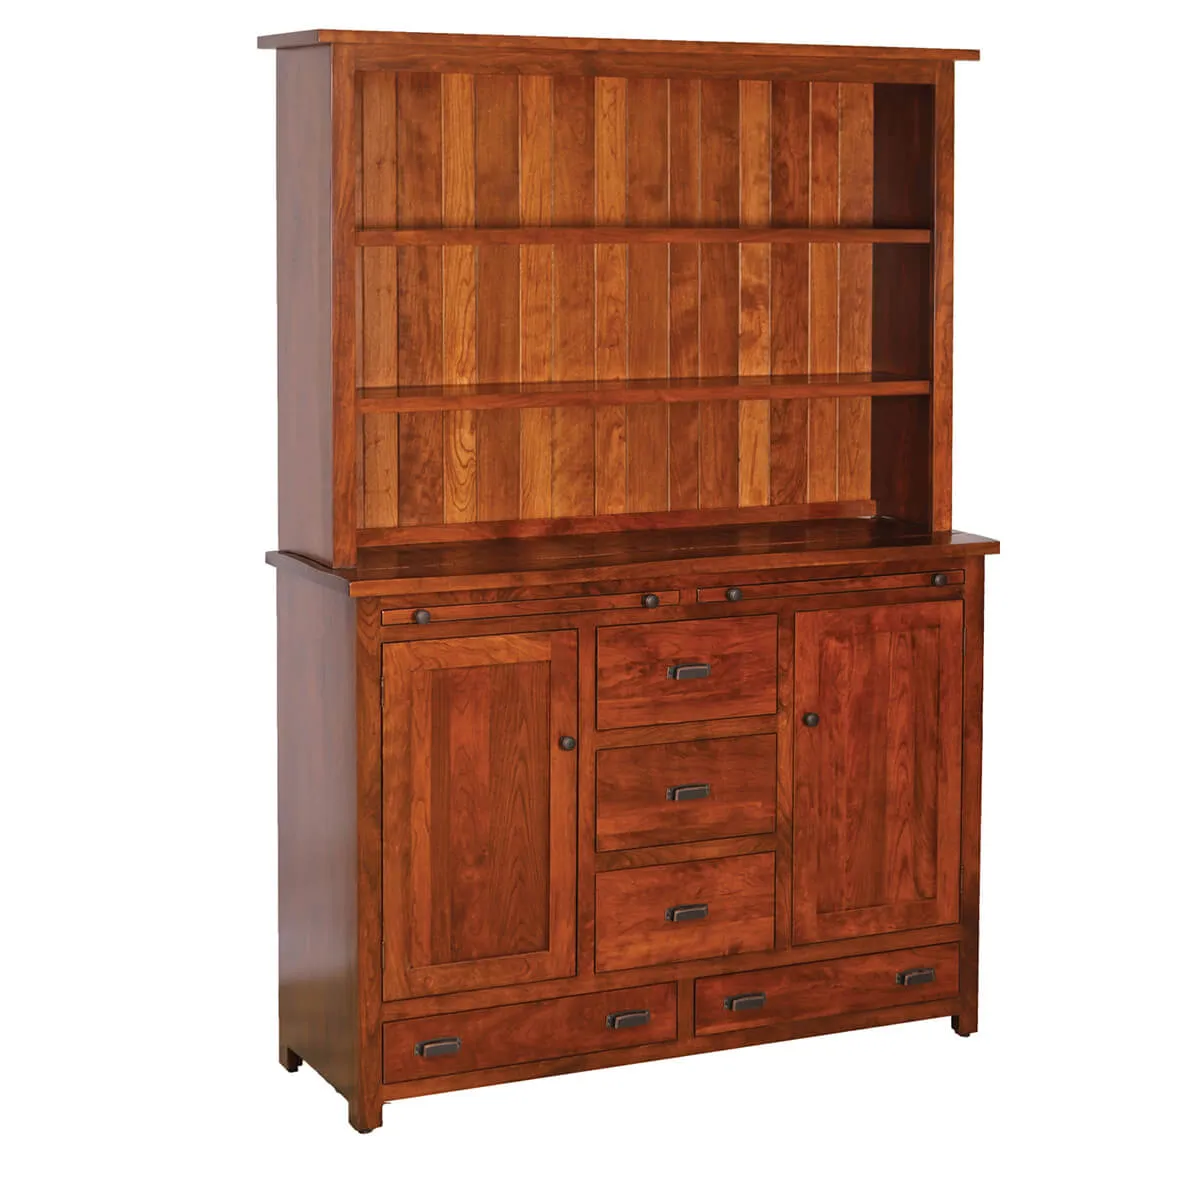 Settlers 56 Inch Hutch with Open Top